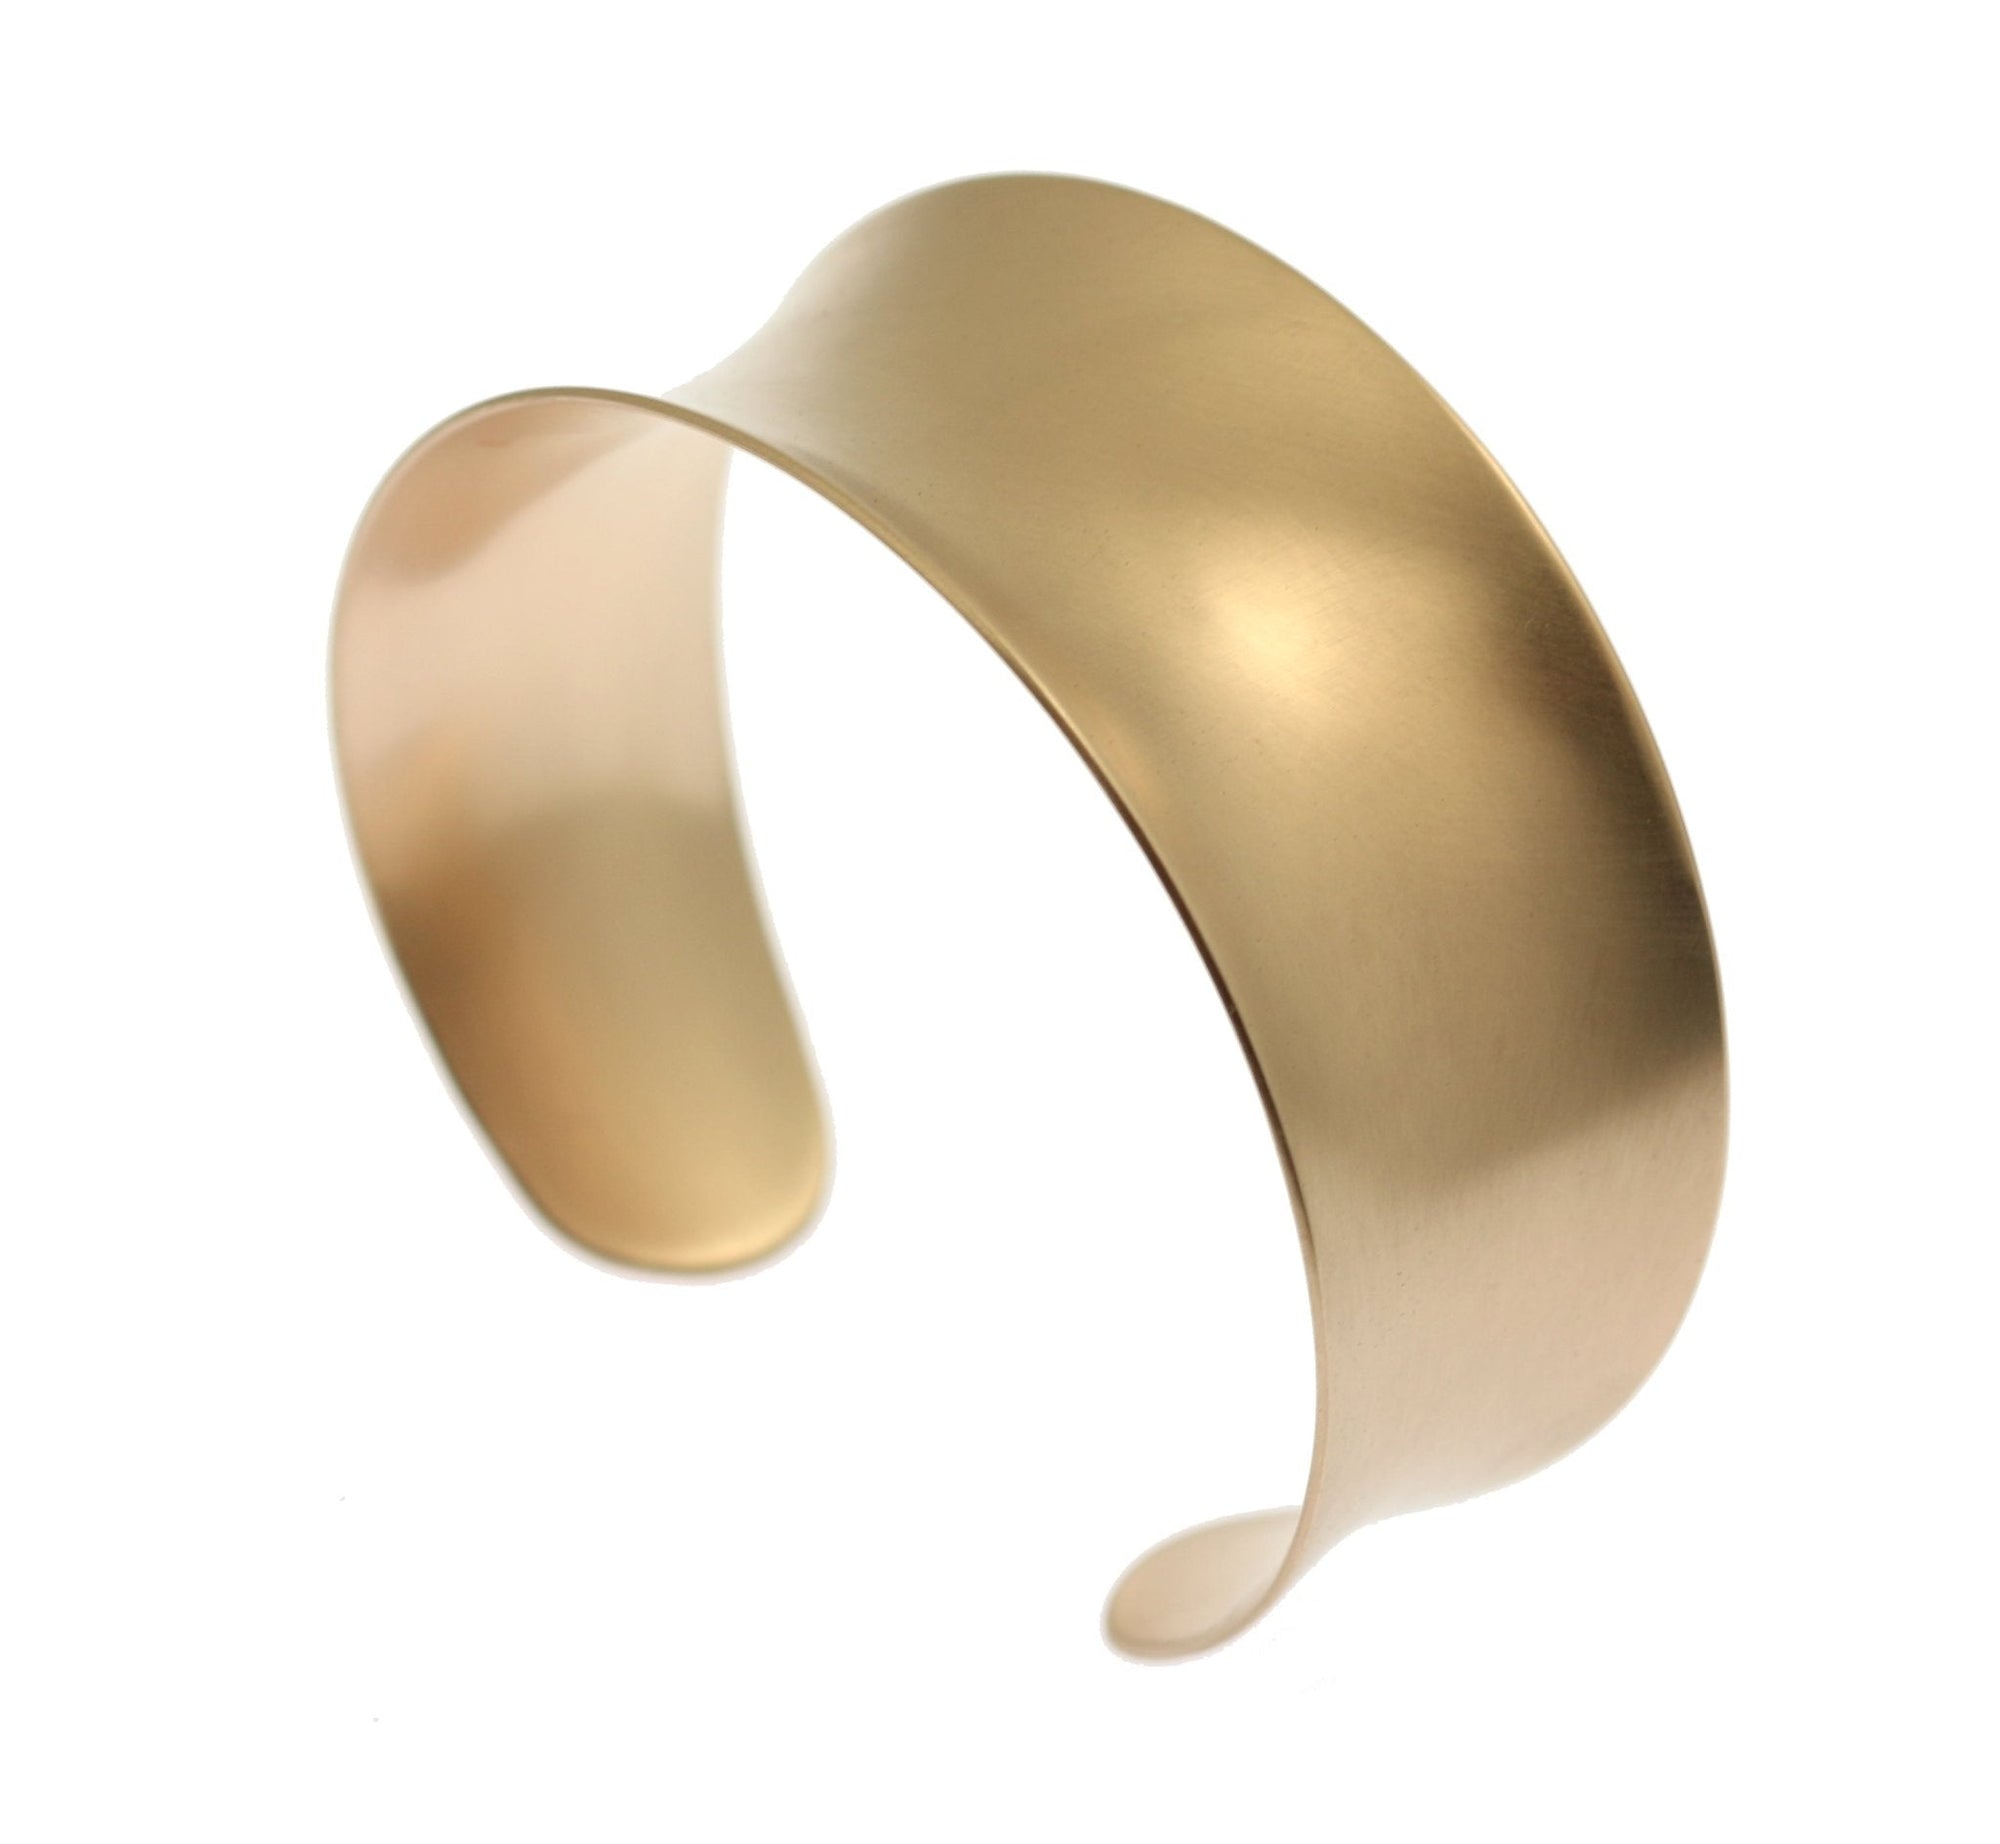 Detail View of Brushed Bronze Anticlastic Cuff